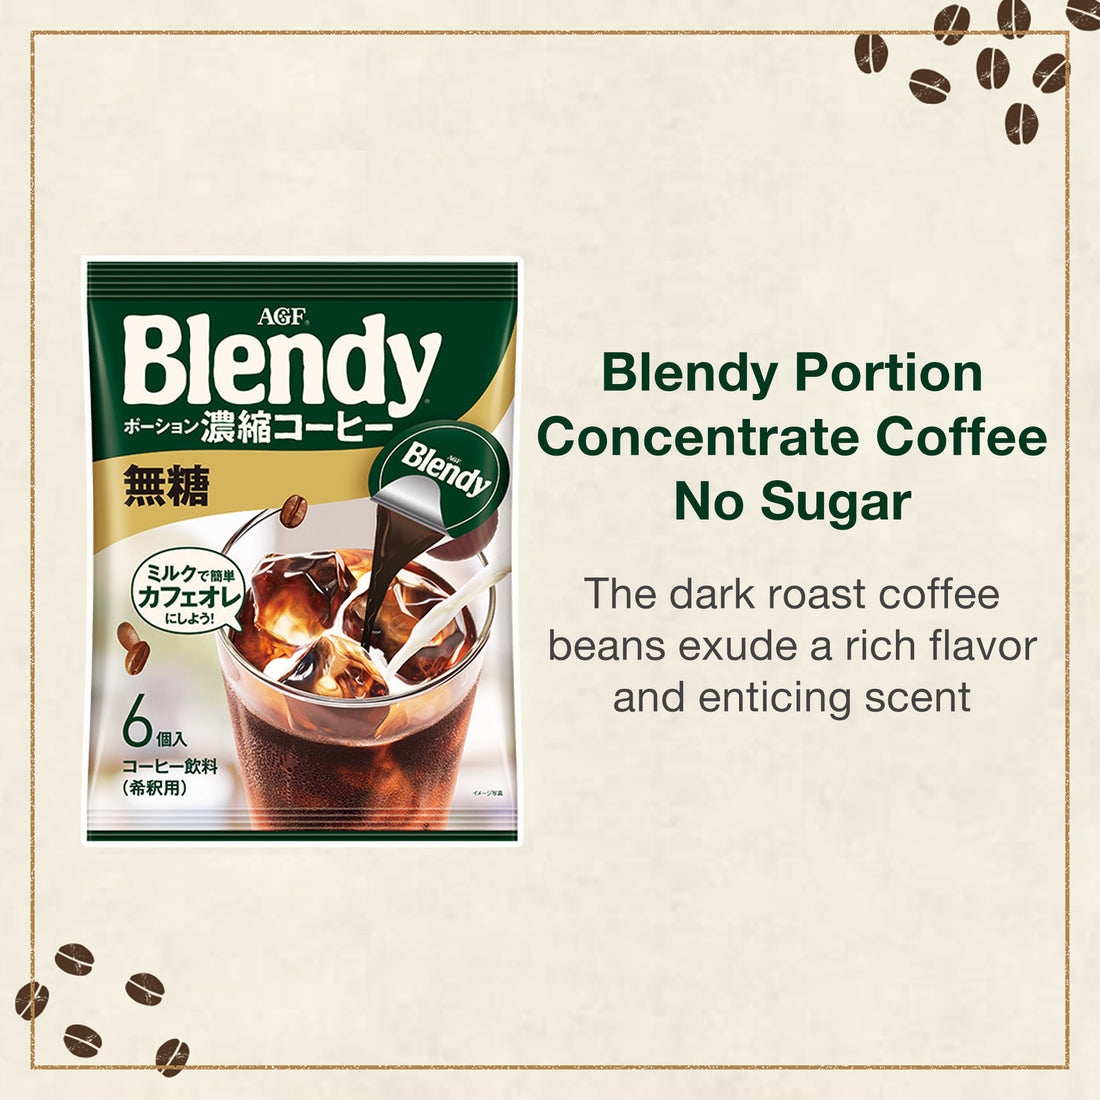 AGF Blendy Portion Concentrated Coffee No Sugar